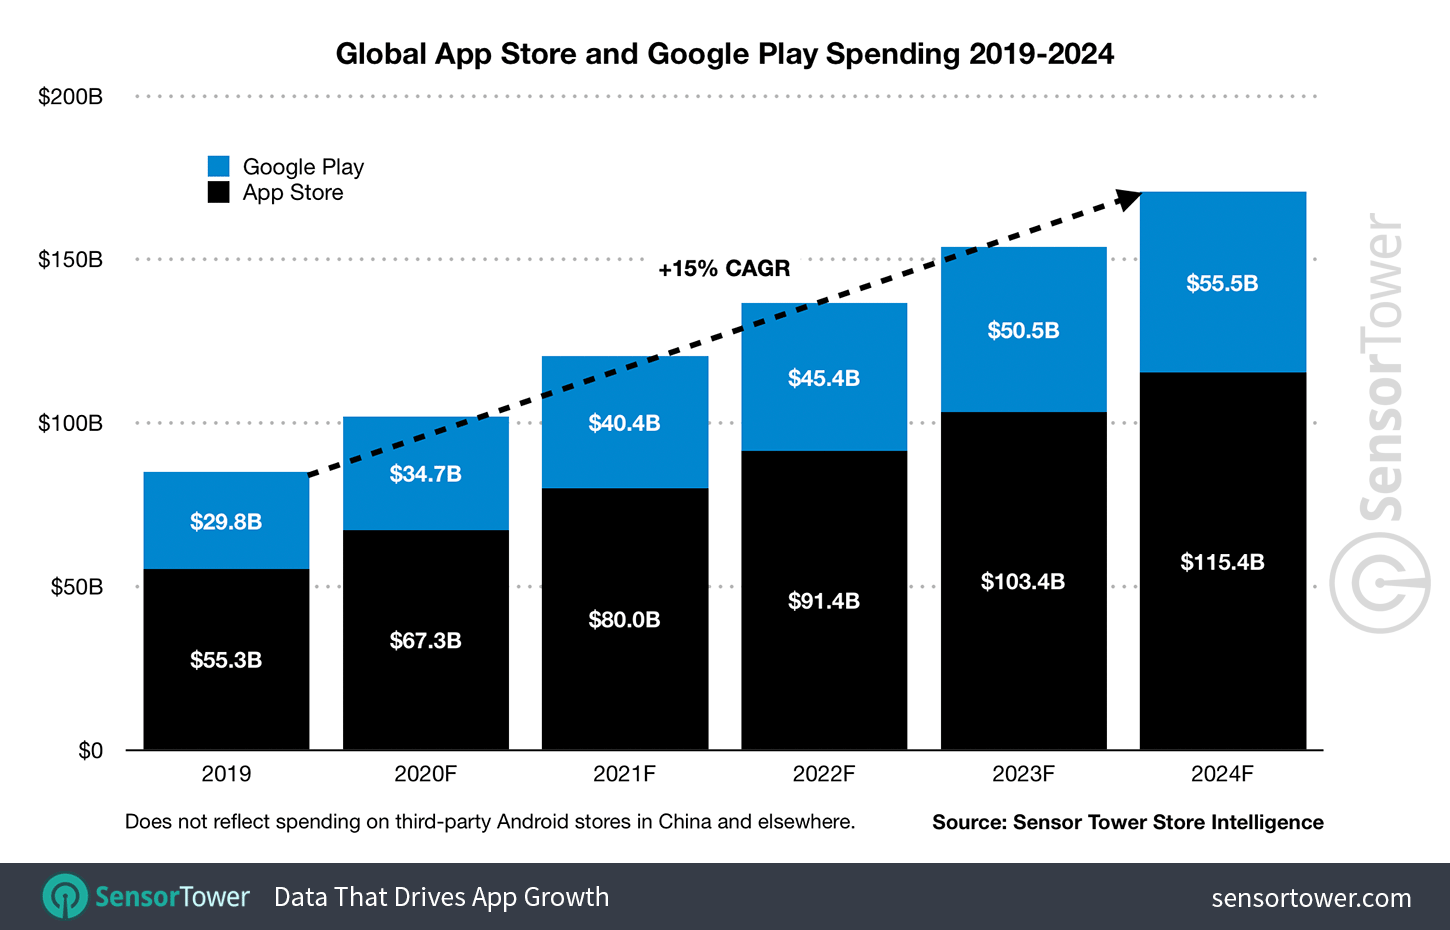 App Store and Google Play Global Revenue Between 2019 and 2024